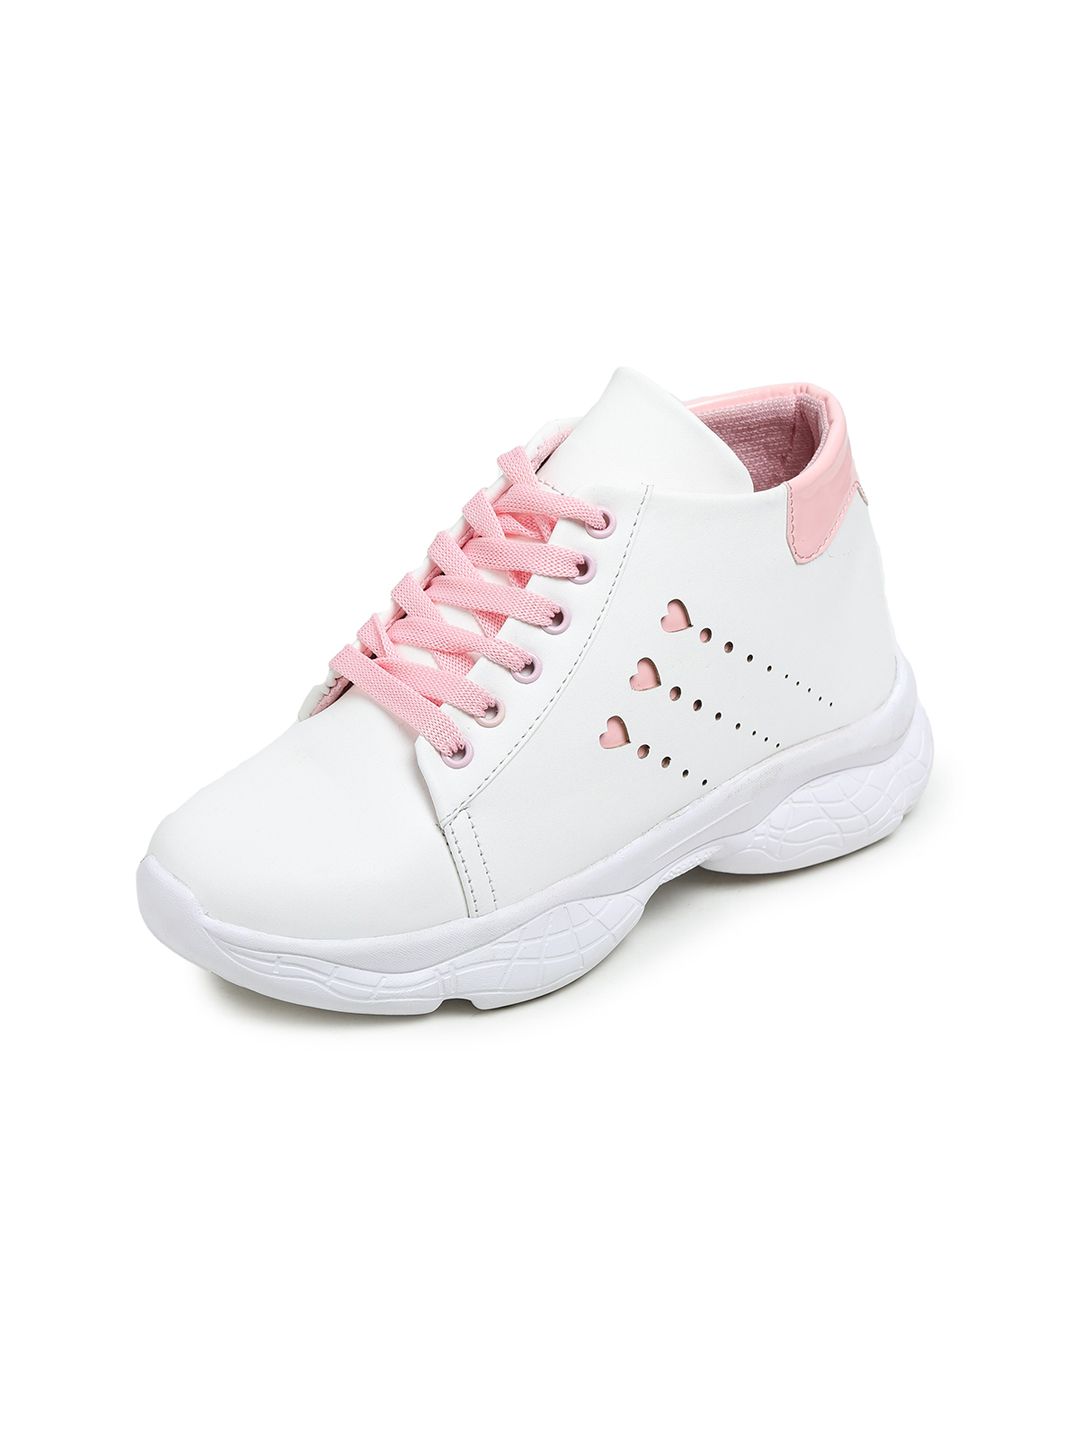 BOOTCO Women Pink Printed Sneakers Price in India